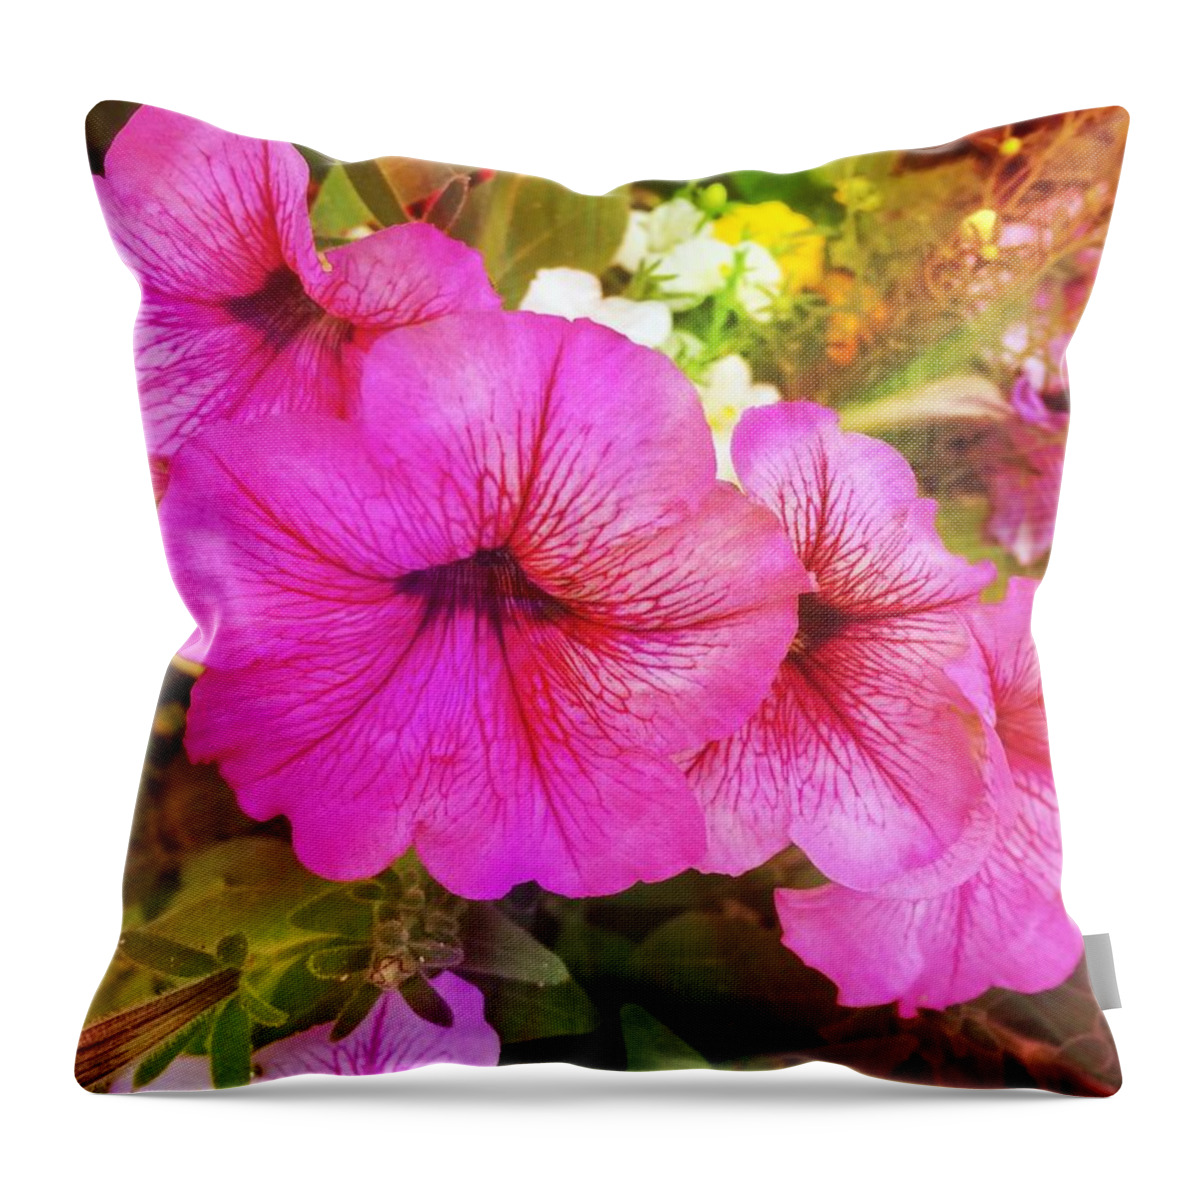 Pretty Pink Petunias Throw Pillow featuring the photograph Pretty Pink Petunias by Femina Photo Art By Maggie